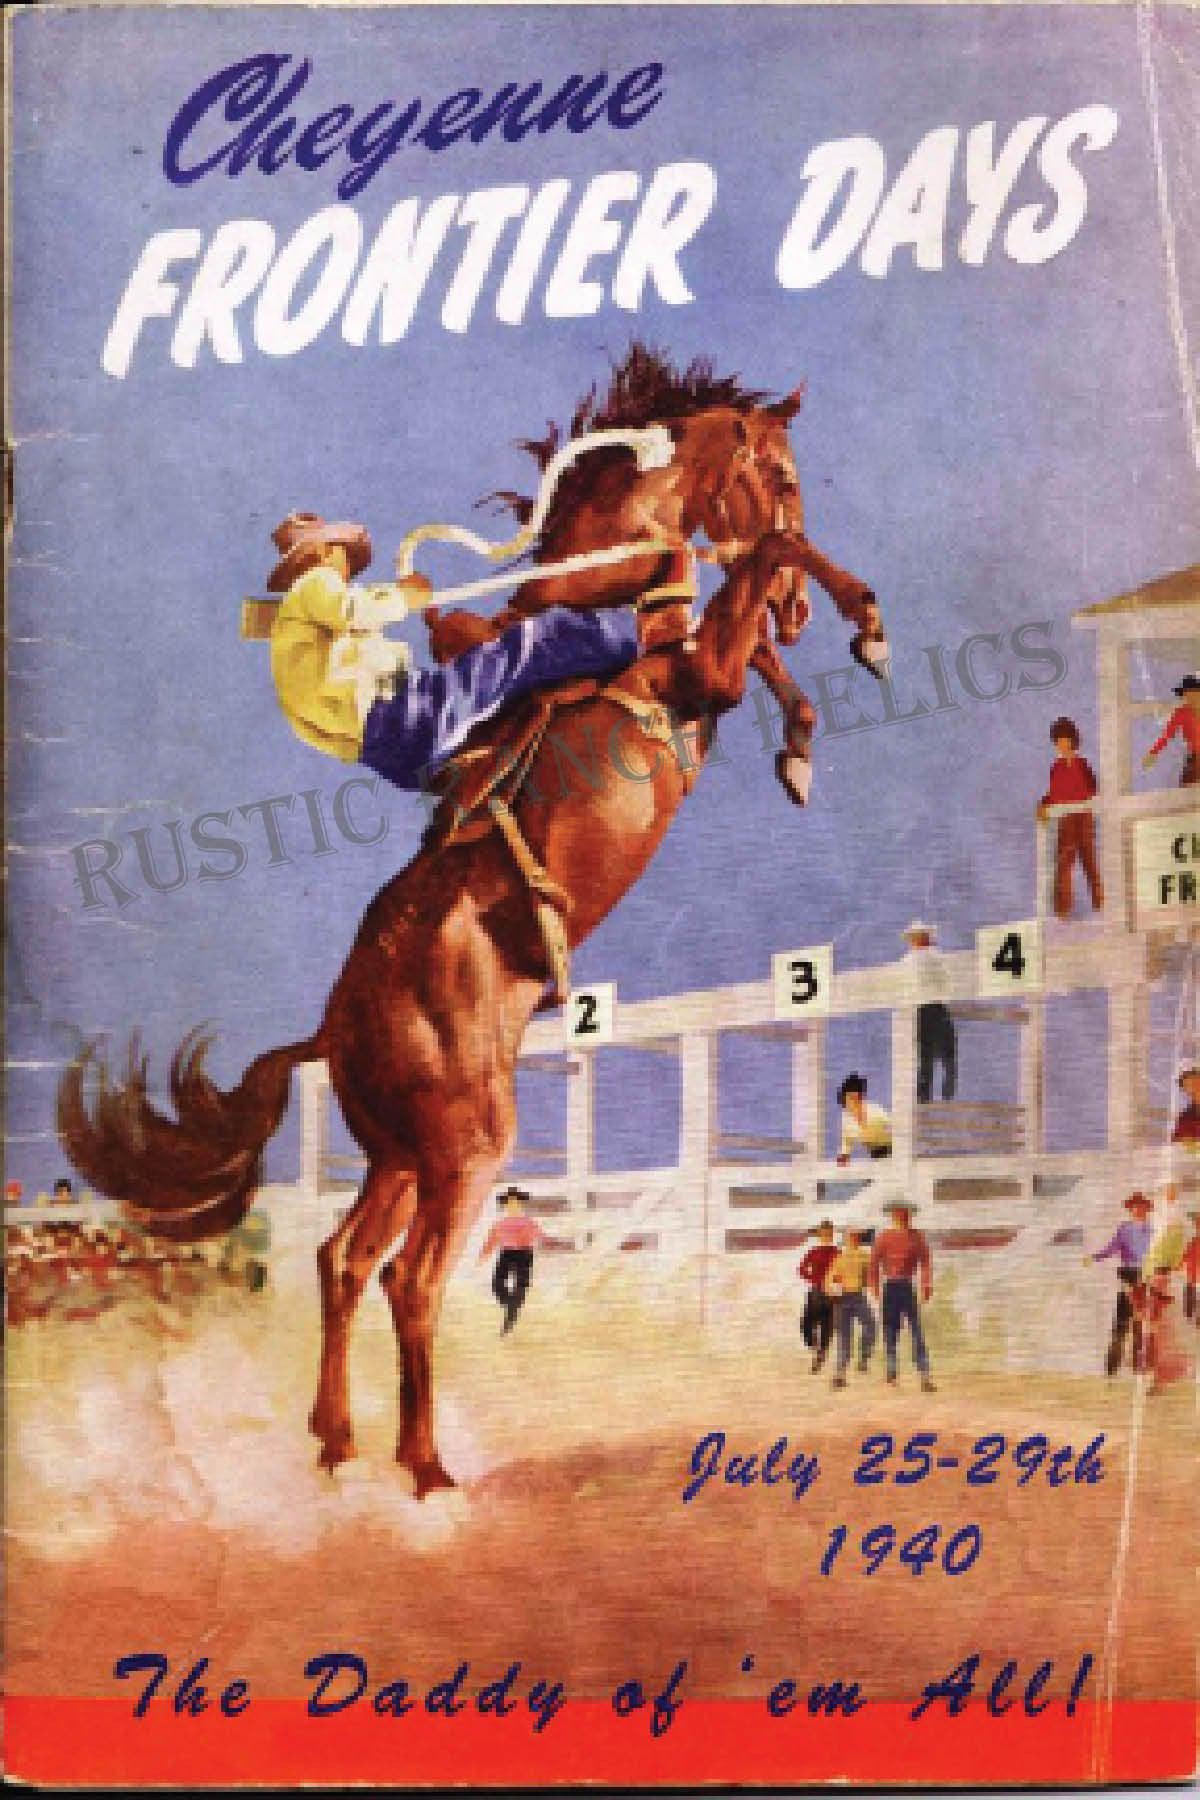 Cheyenne Frontier Days 1940 - Vintage Rodeo Poster